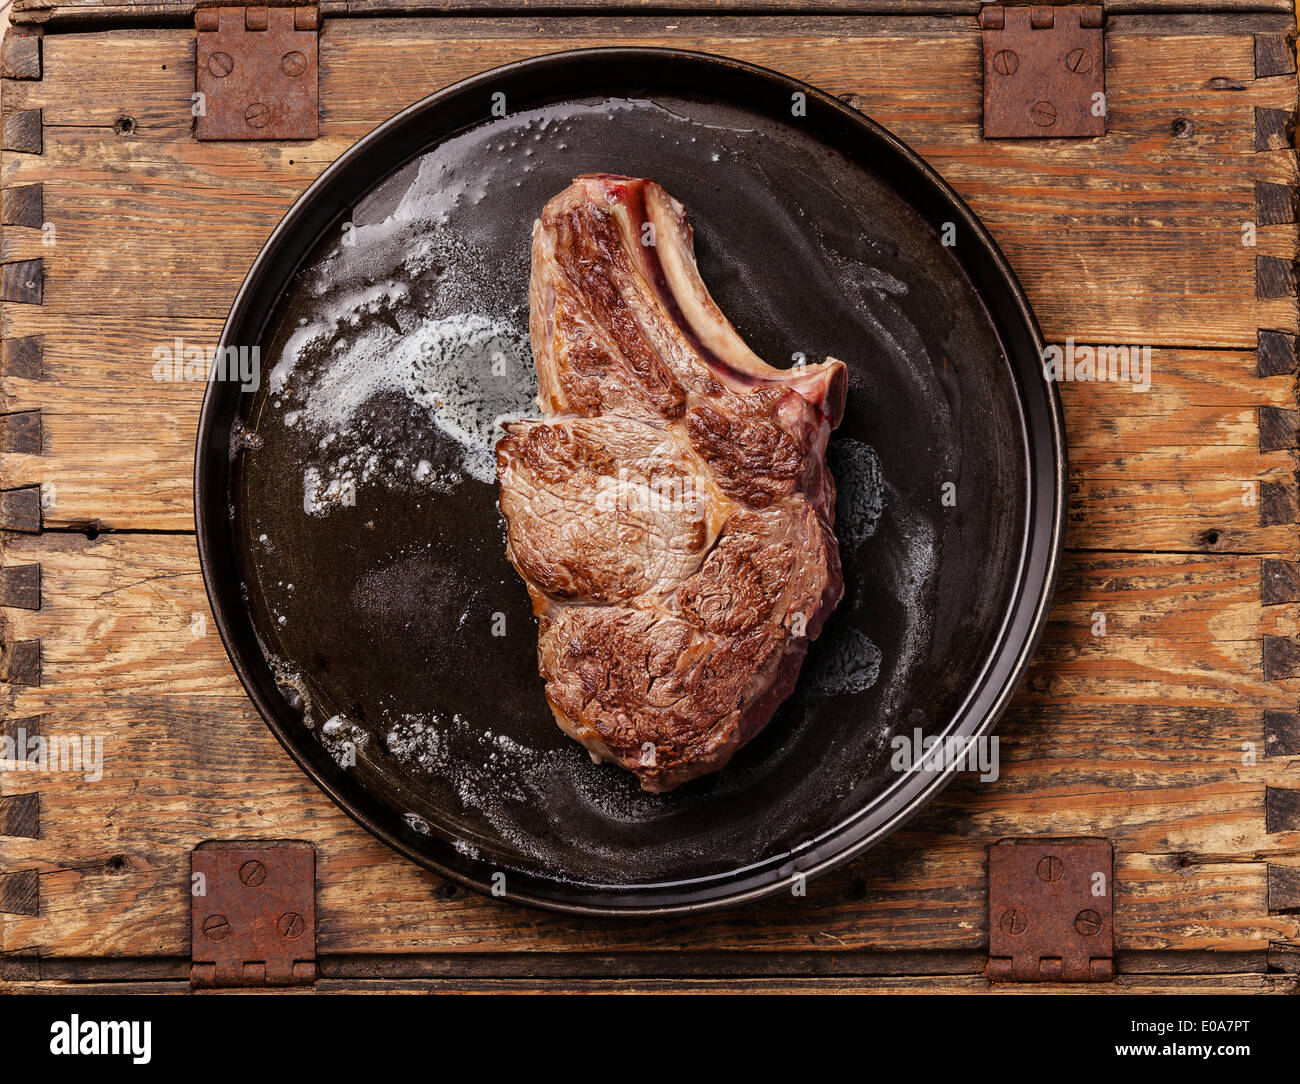 Veal cutlet with bone on pan on wooden background Stock Photo